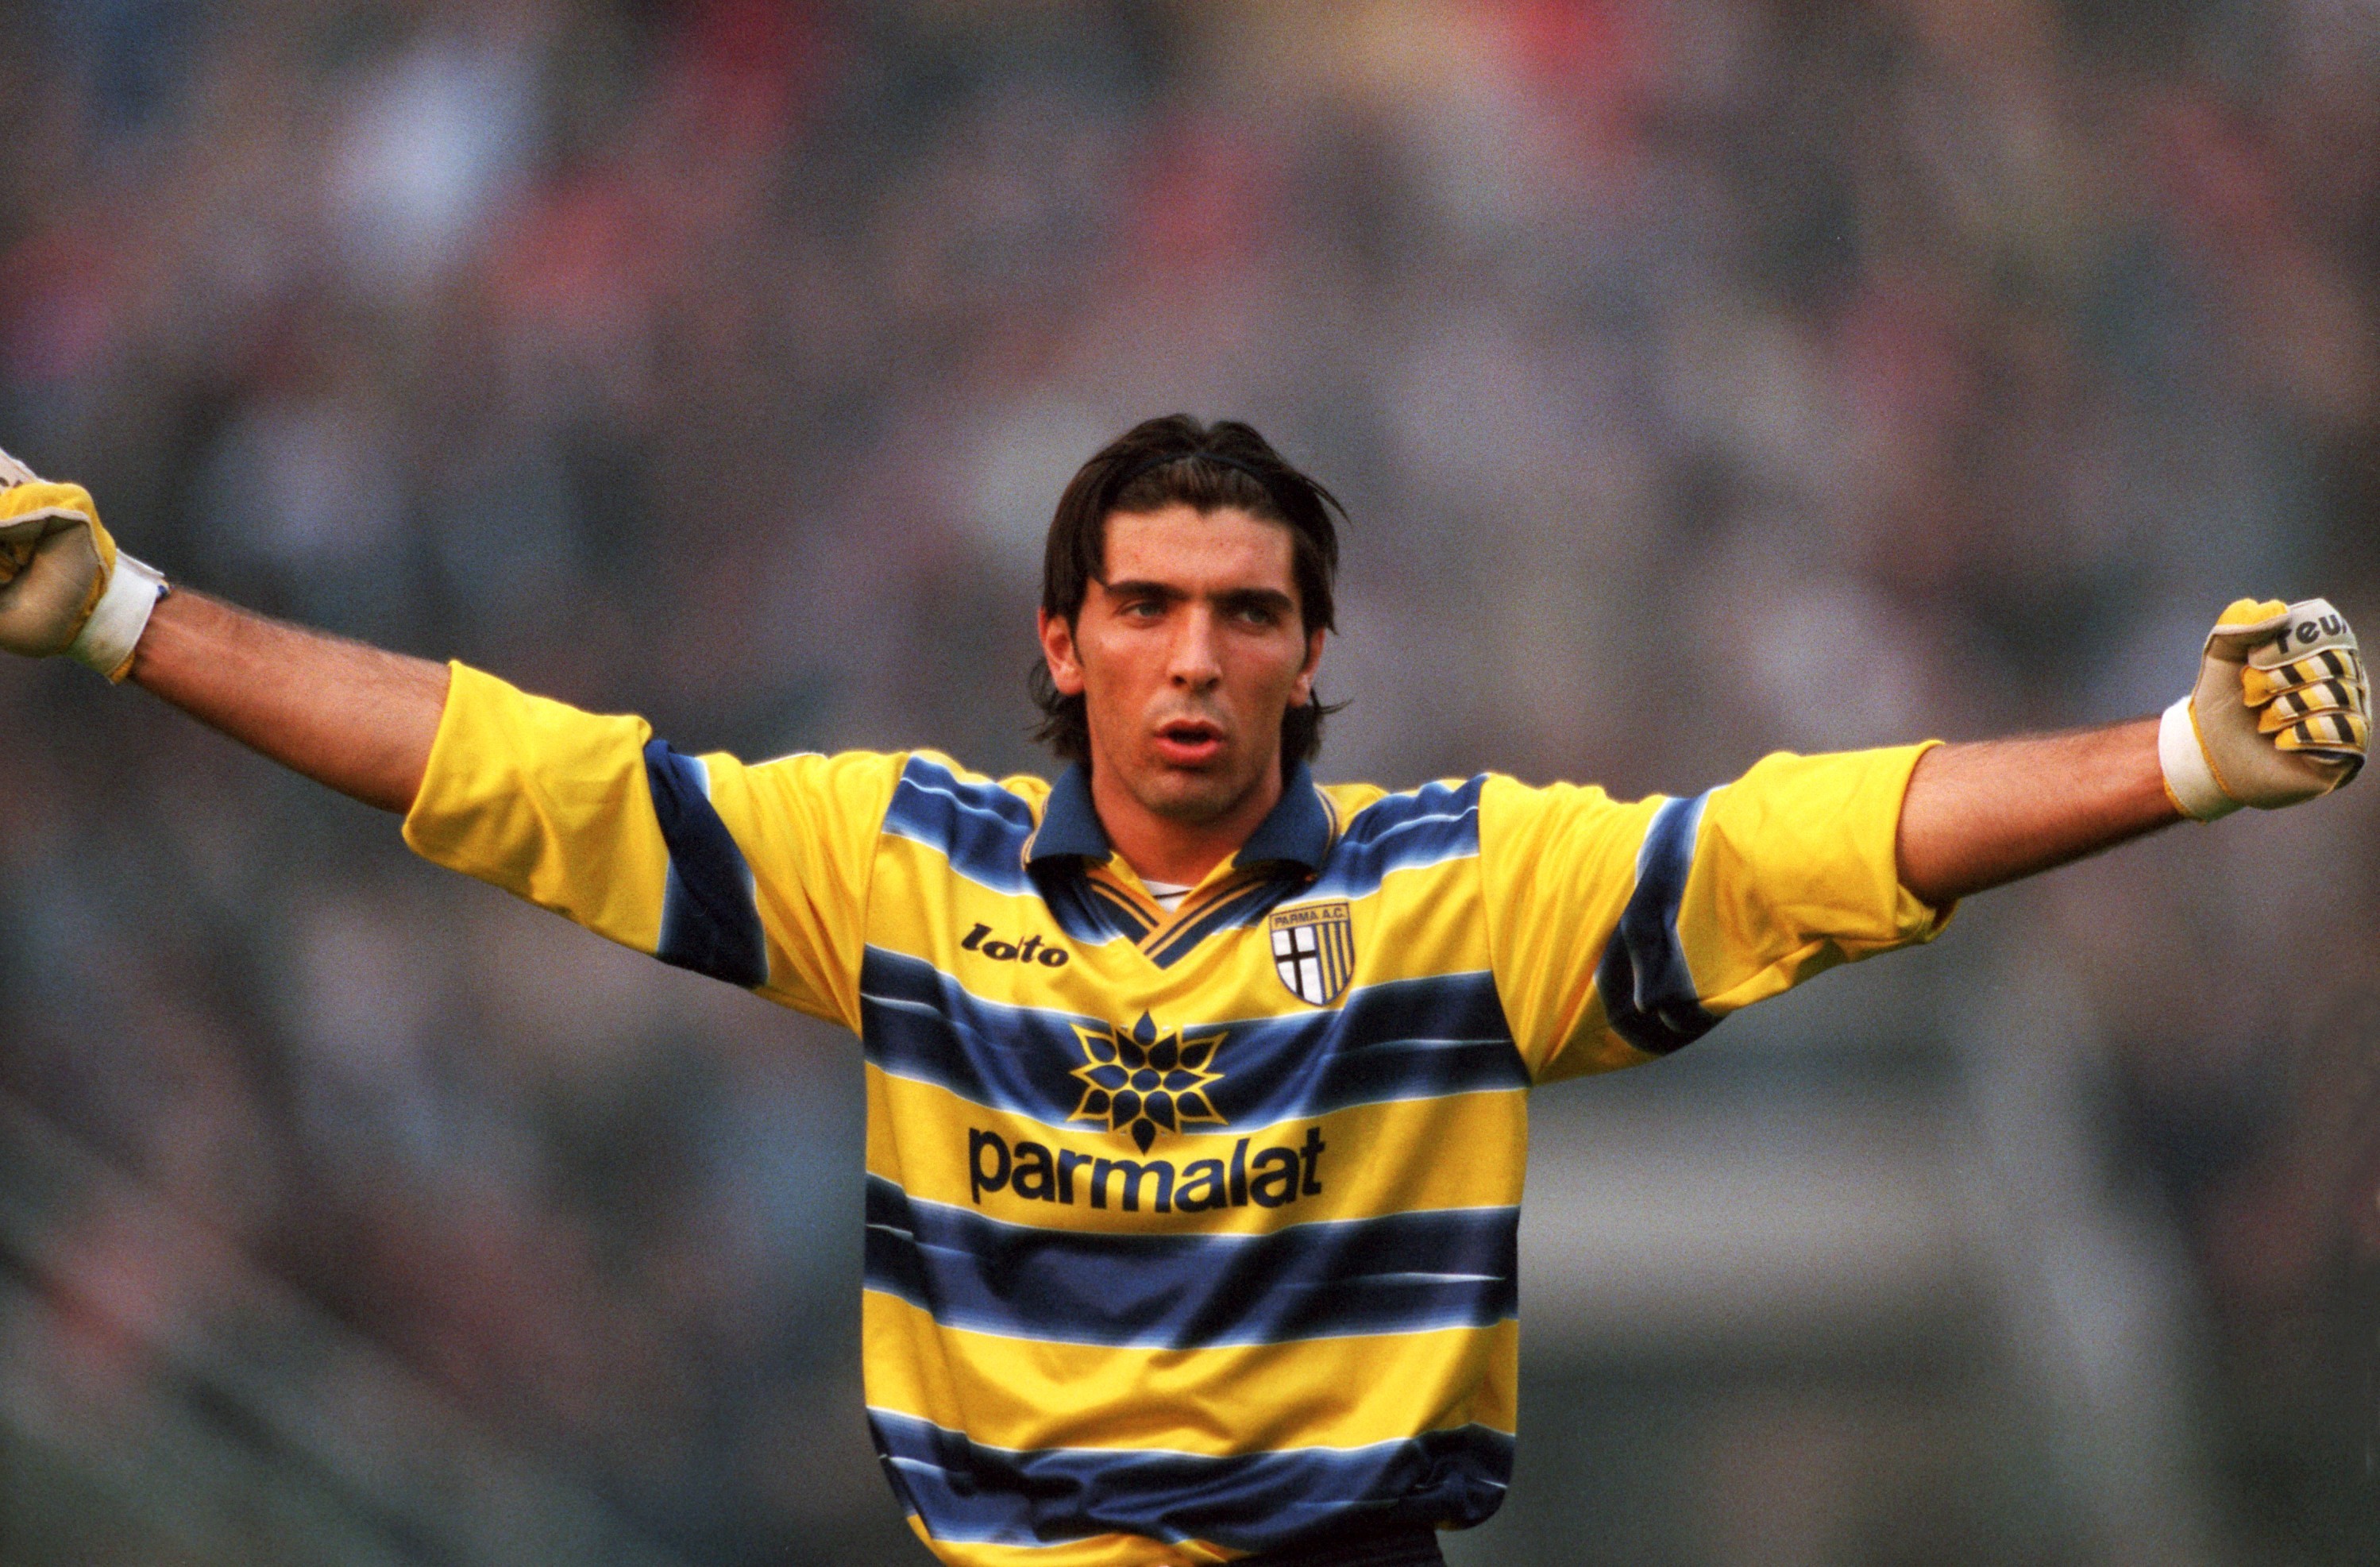 Remembering The Glory Days at Parma, Once One Of Italy's Most